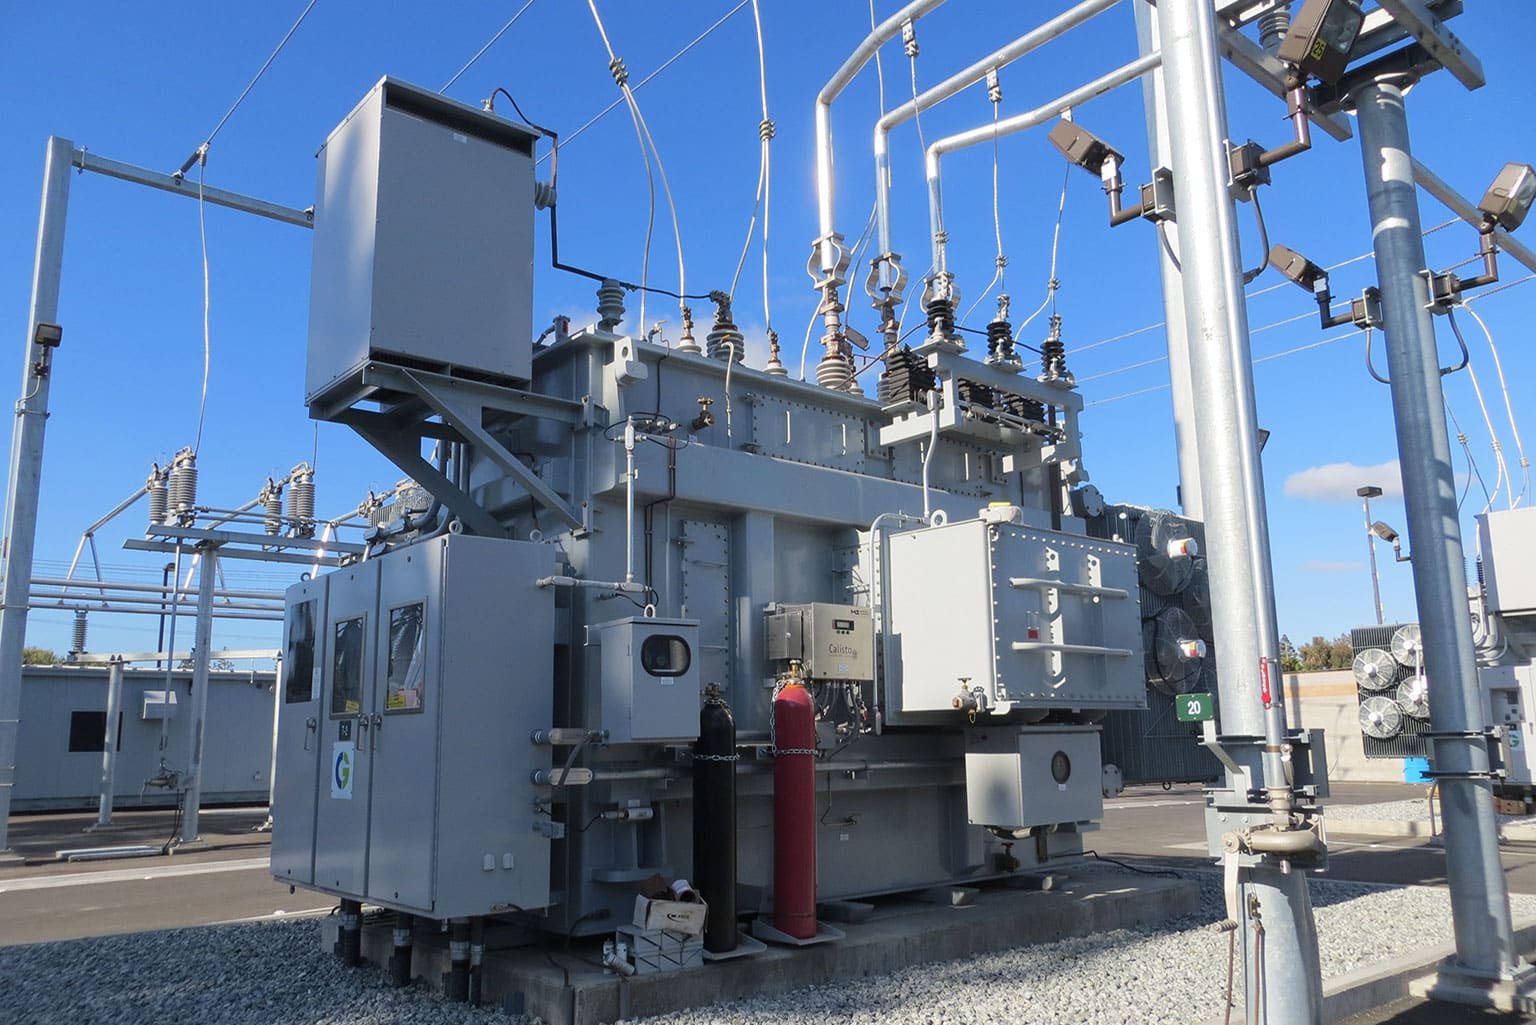 commercial electrical generator being installed